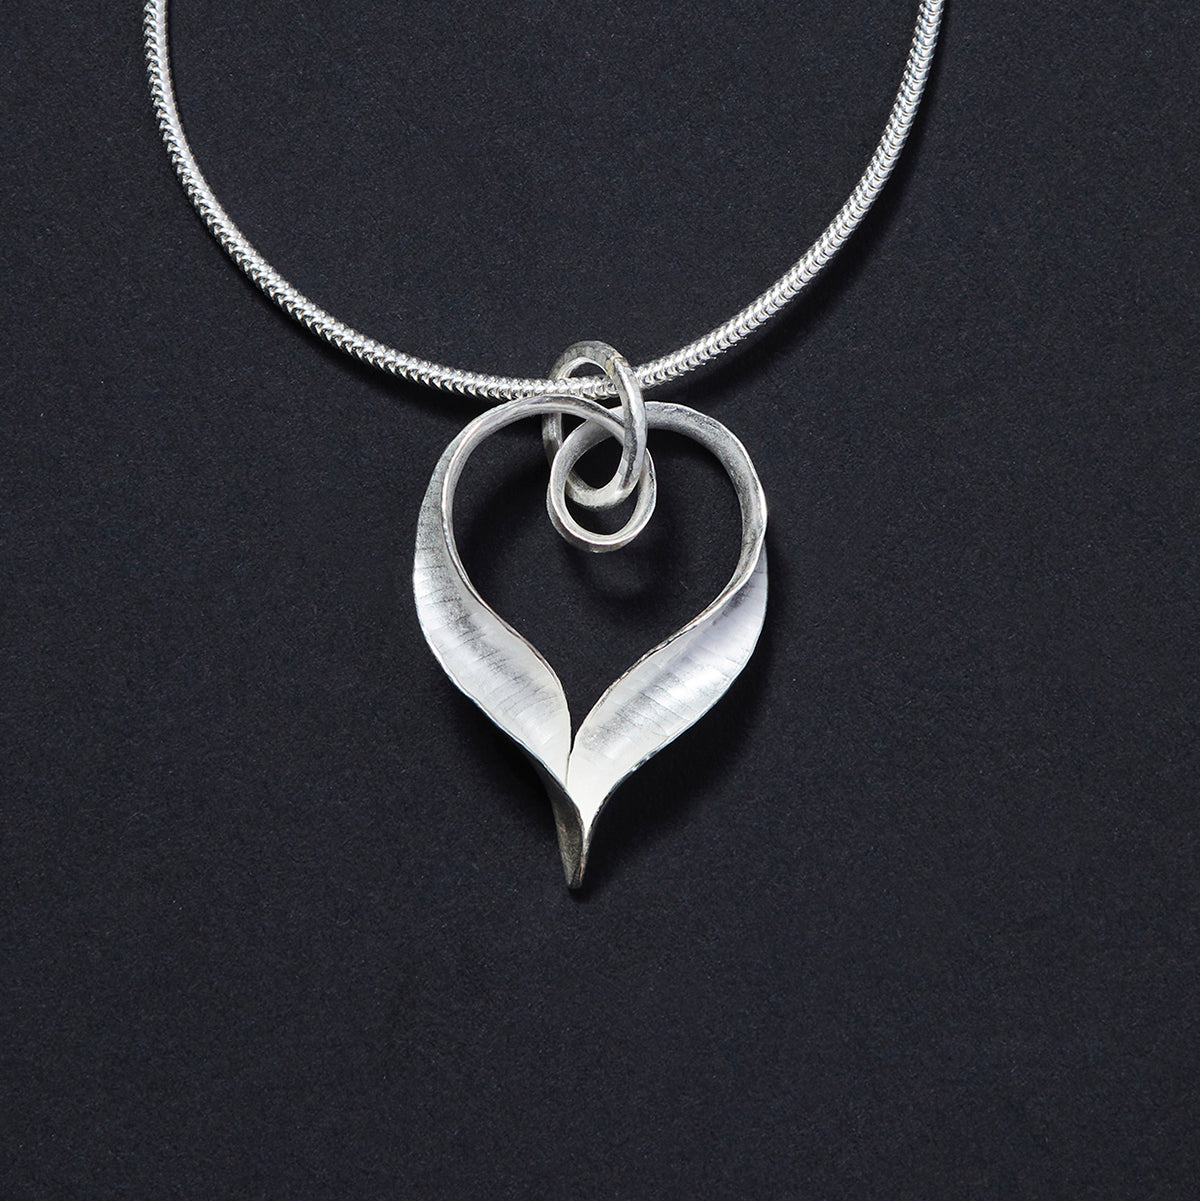 A recycled silver heart pendant made from a ribbon of metal, hammered into a continuous heart shape, with a loop at the top for the chain to pass through and elegant twisted ends which join in a point at the bottom.